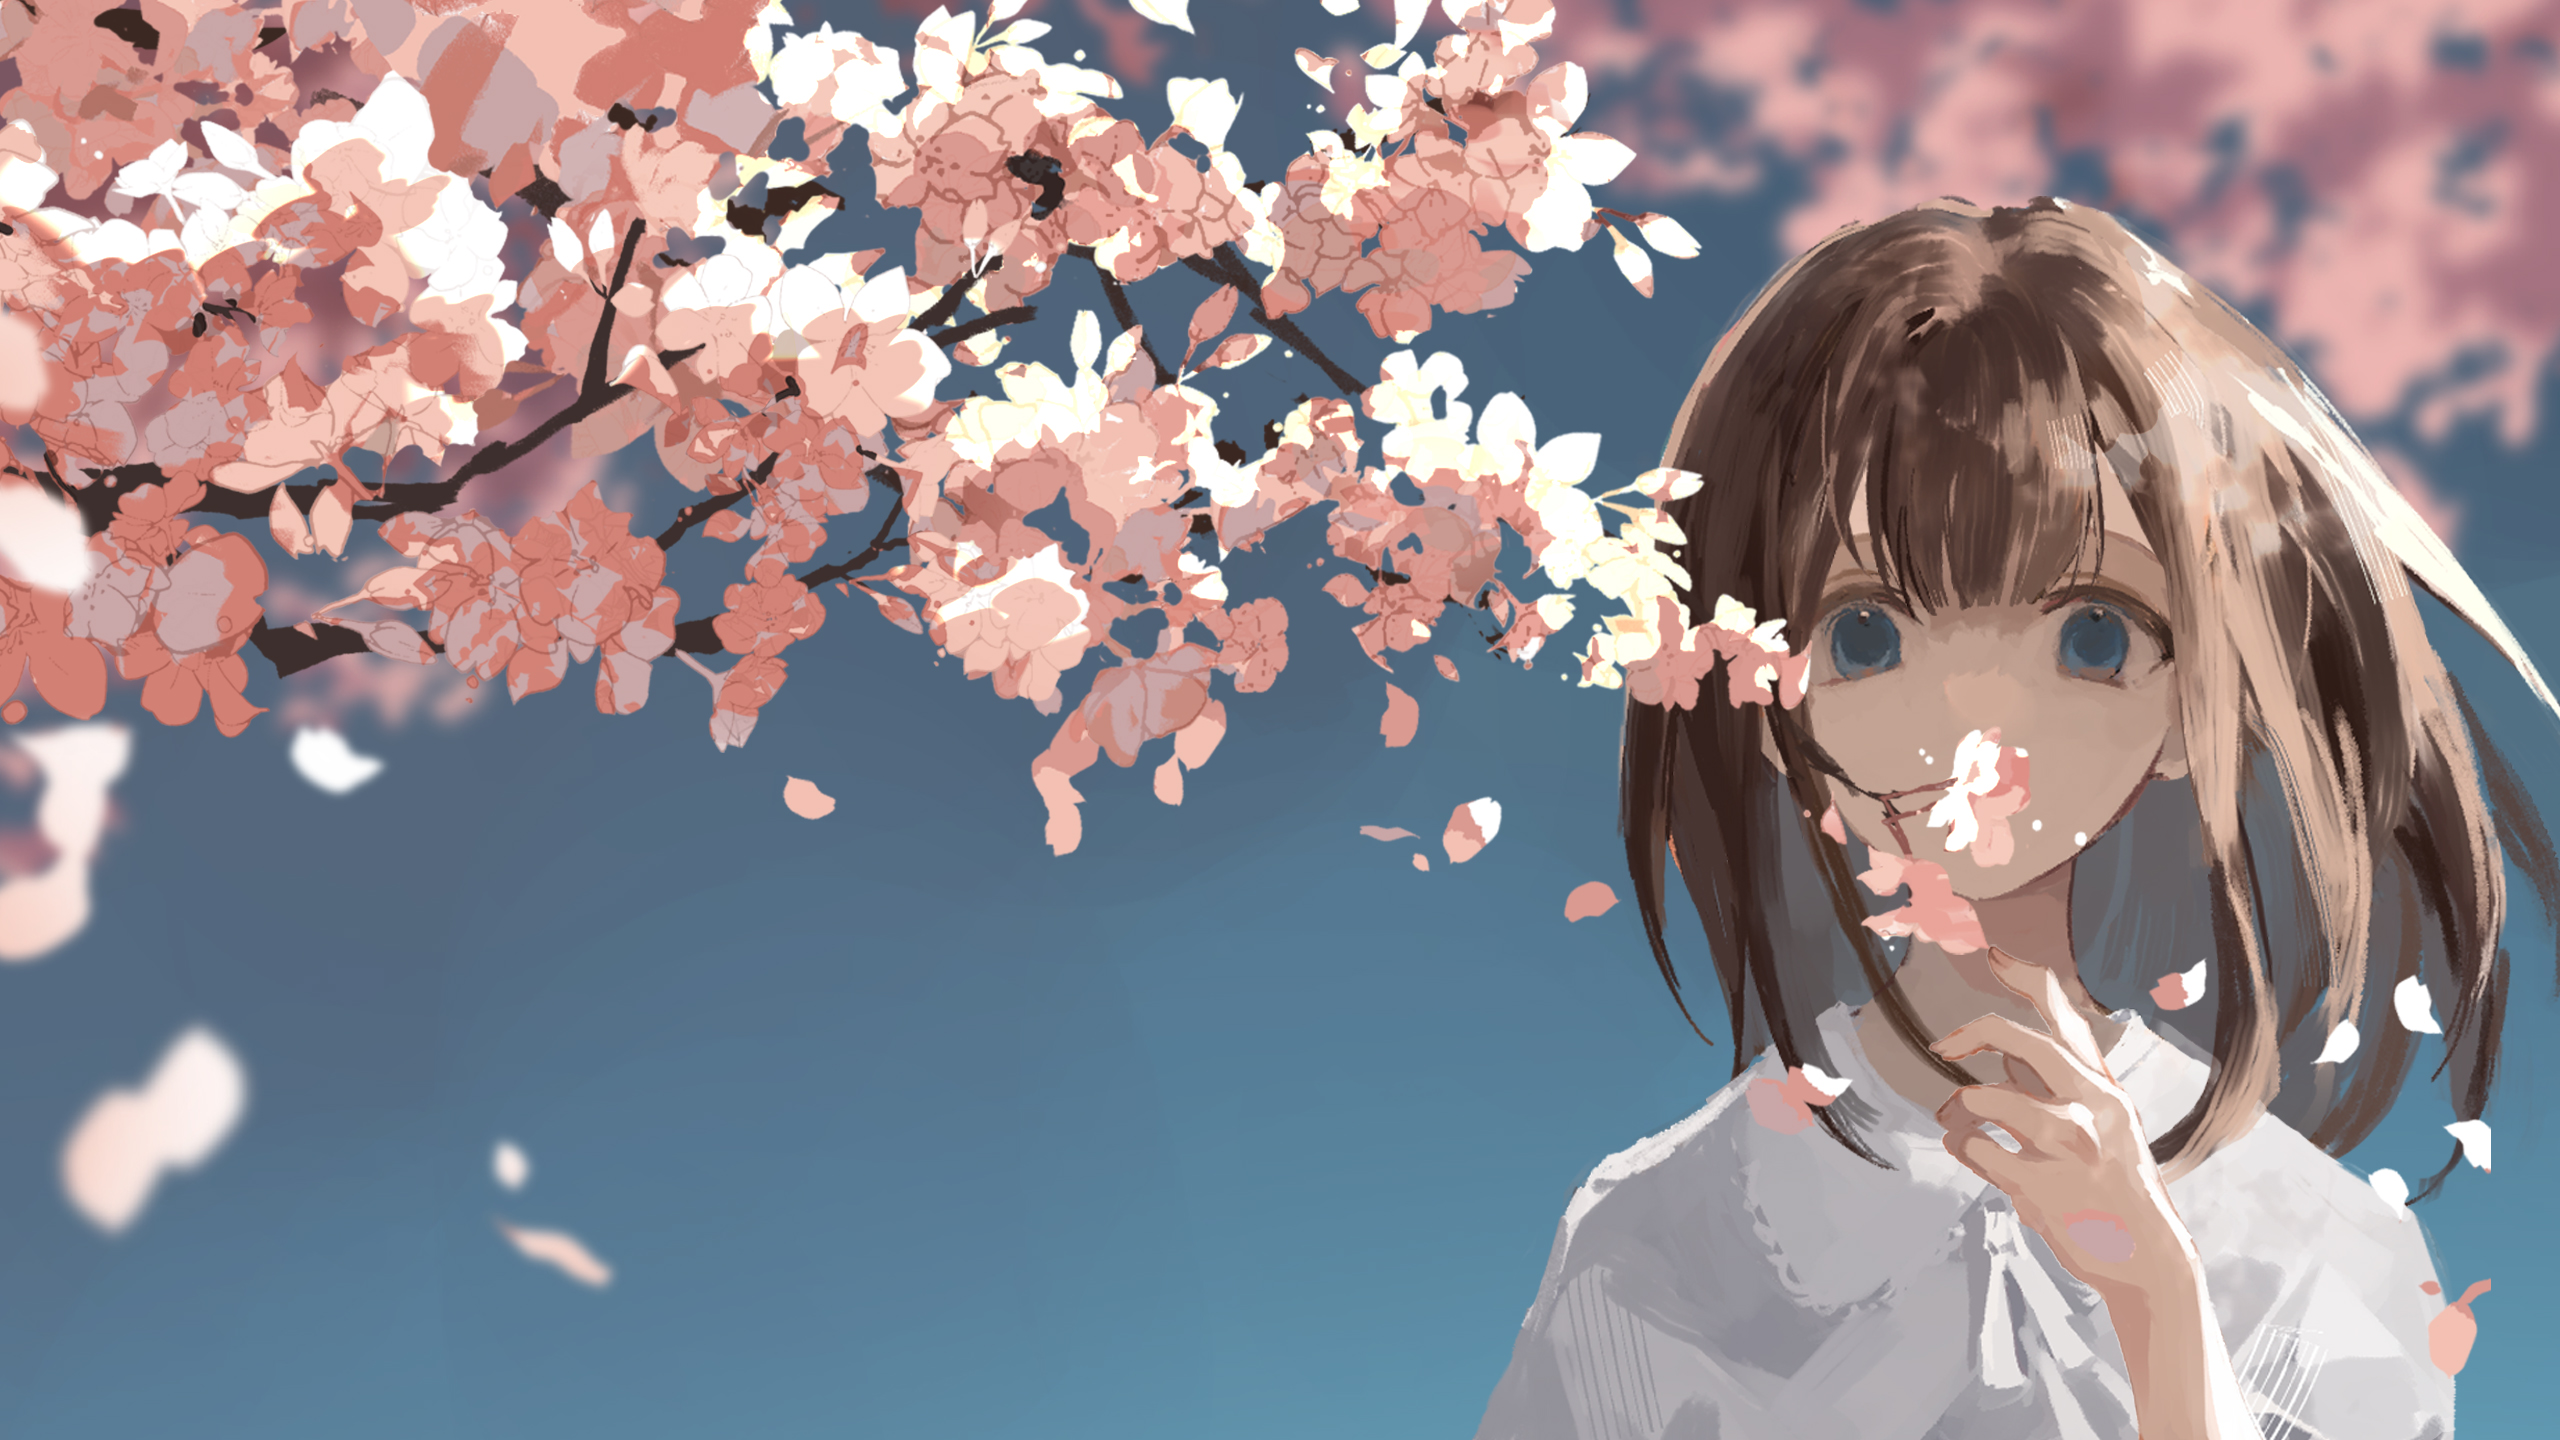 Why are cherry blossoms significant in anime? - Quora